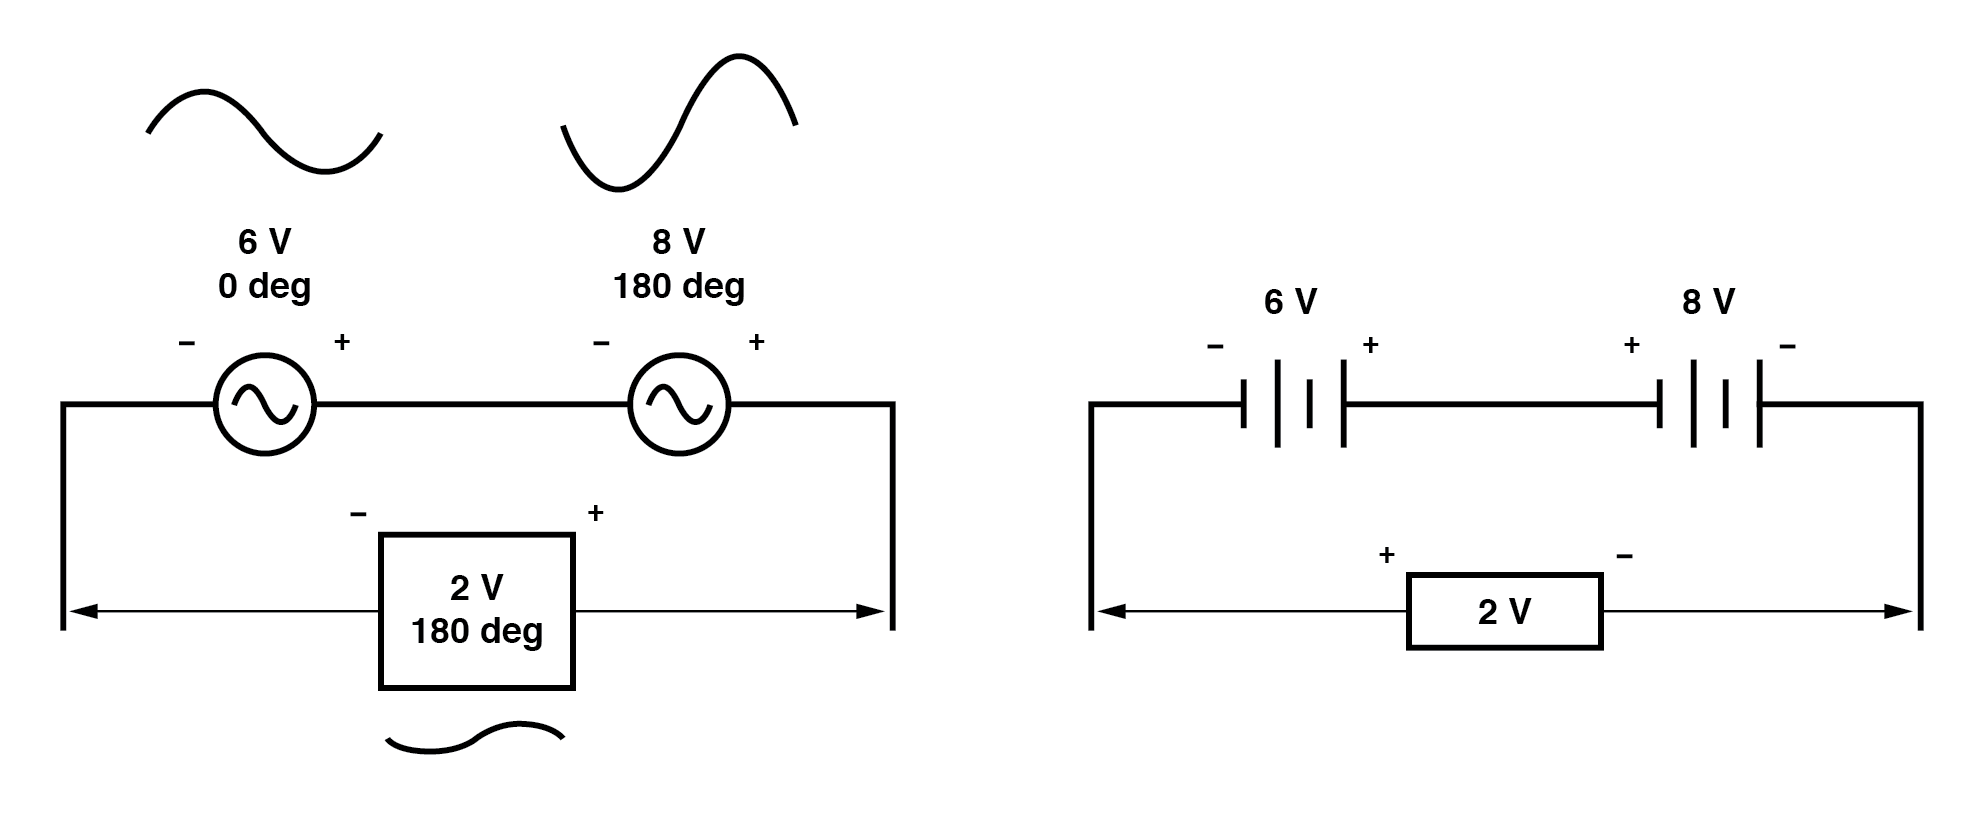 Opposing AC voltages subtract like opposing battery voltages.